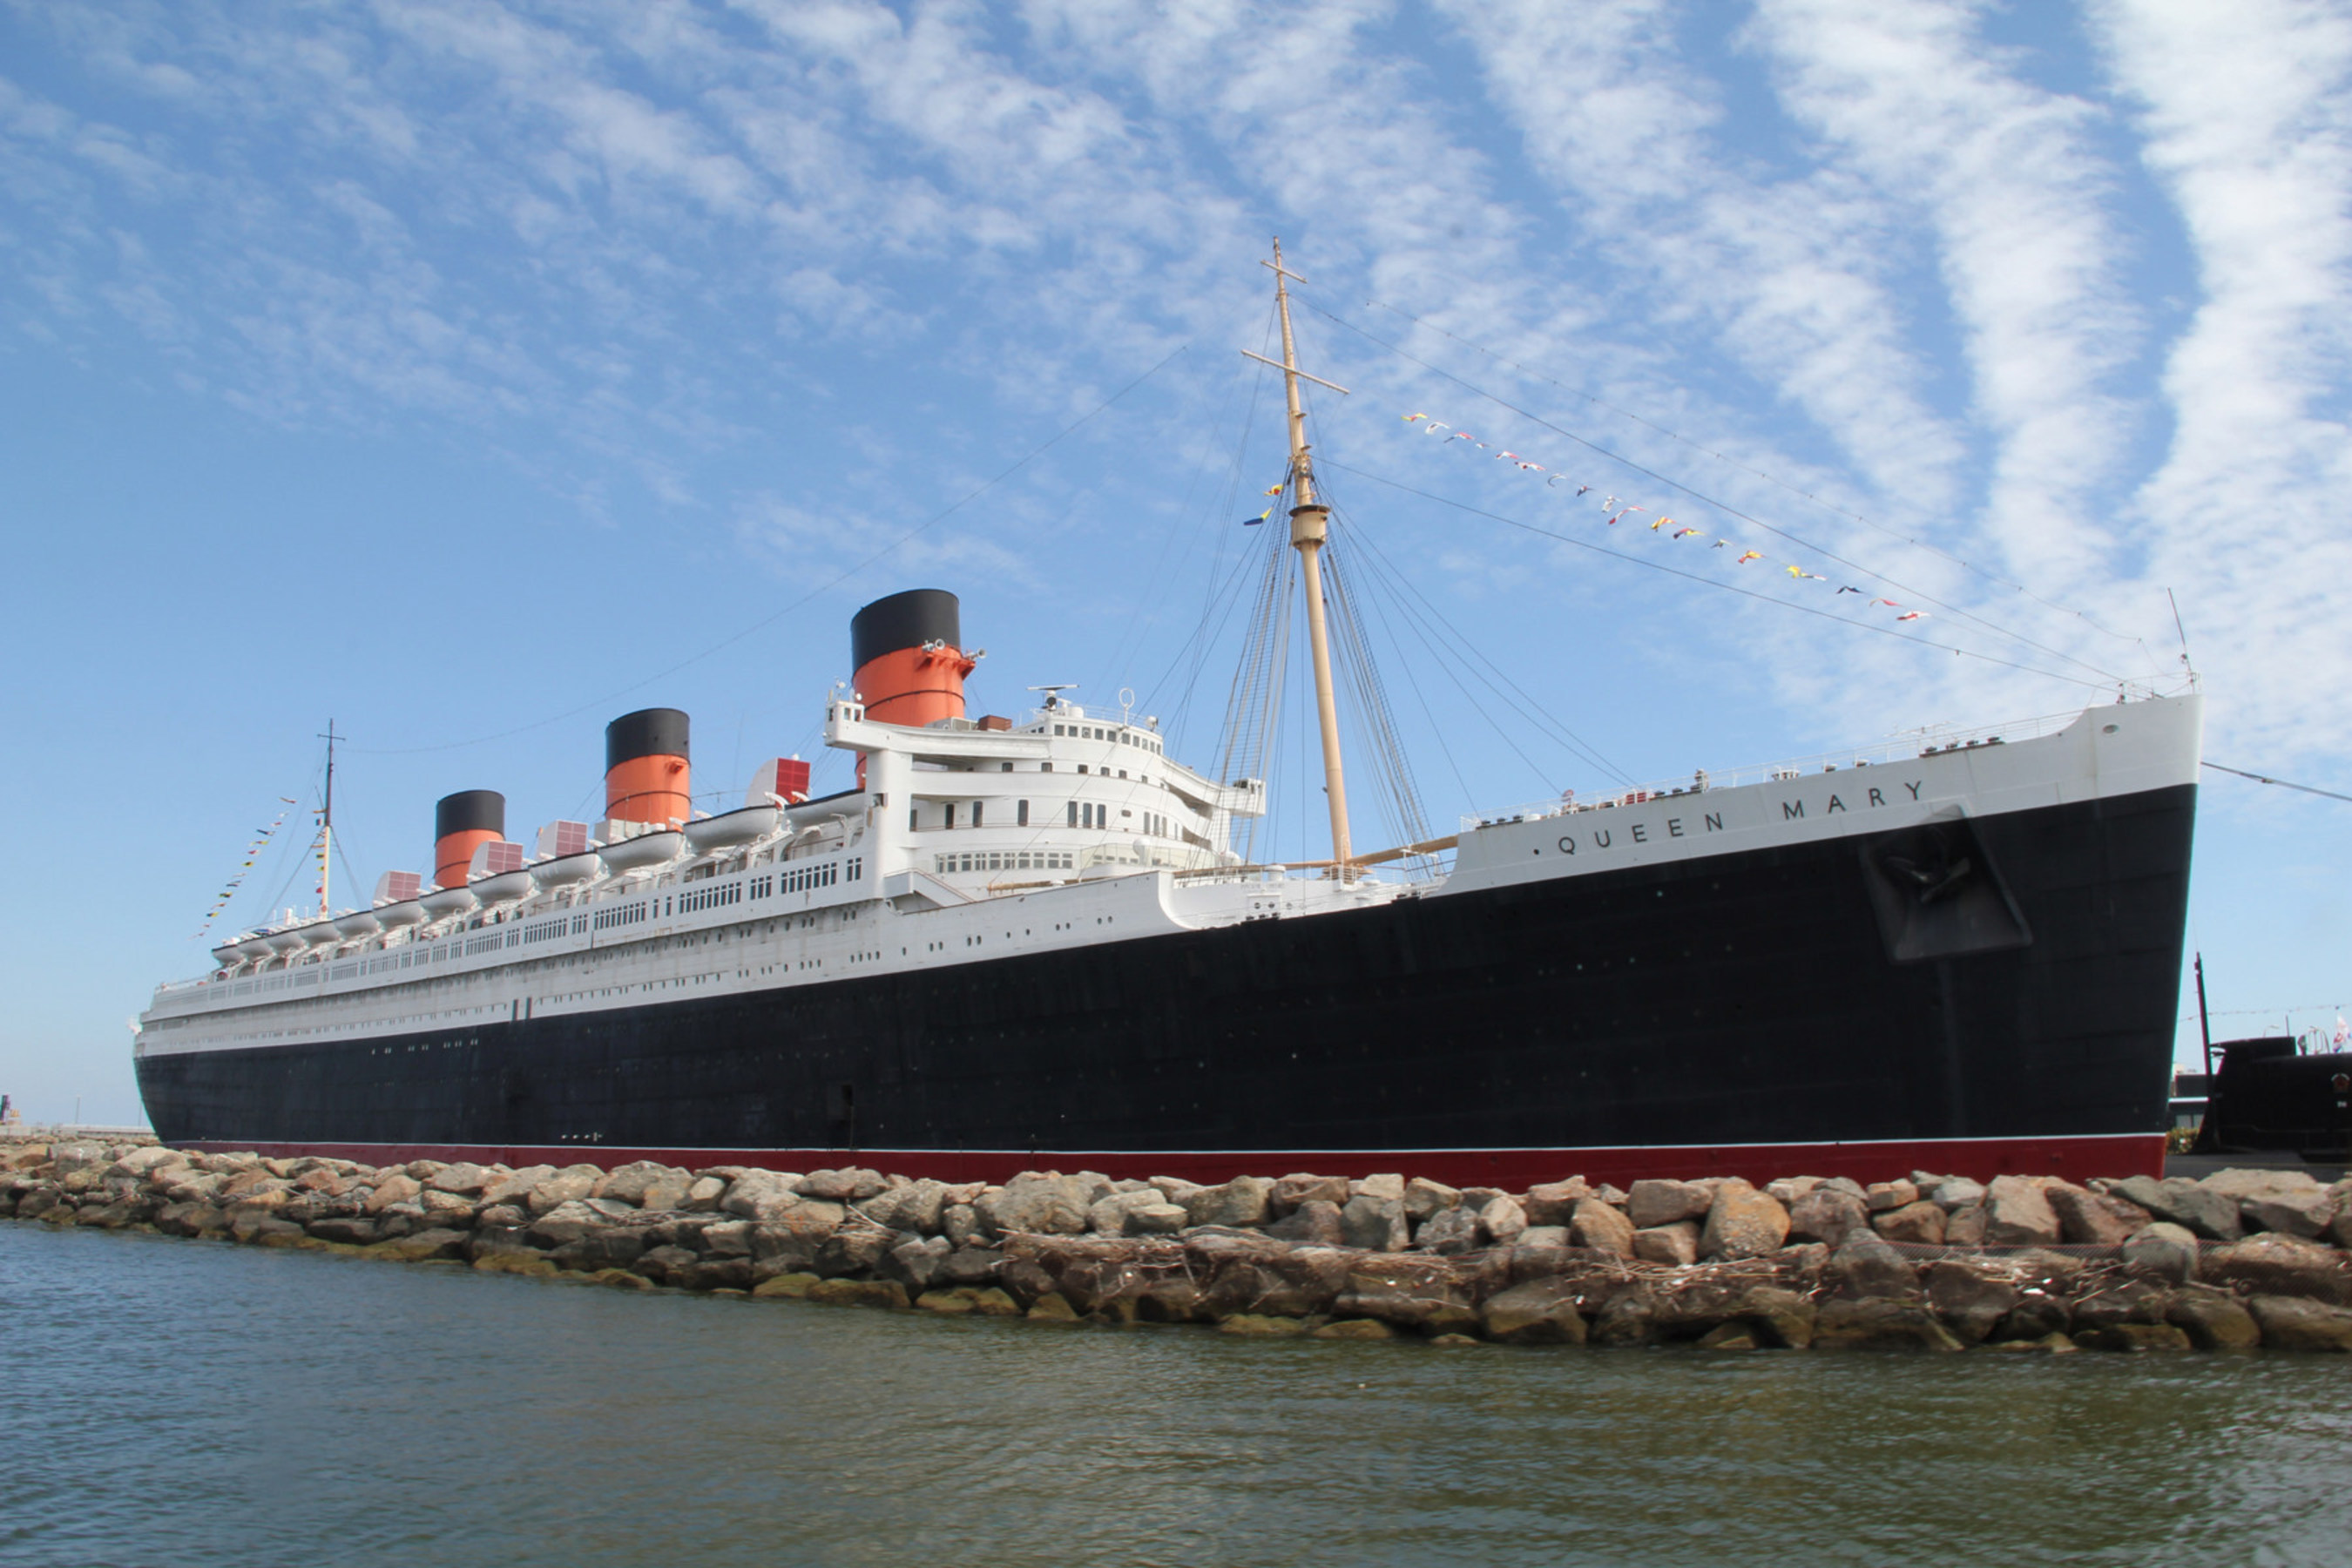 The 80 year old Queen Mary in Long Beach, CA